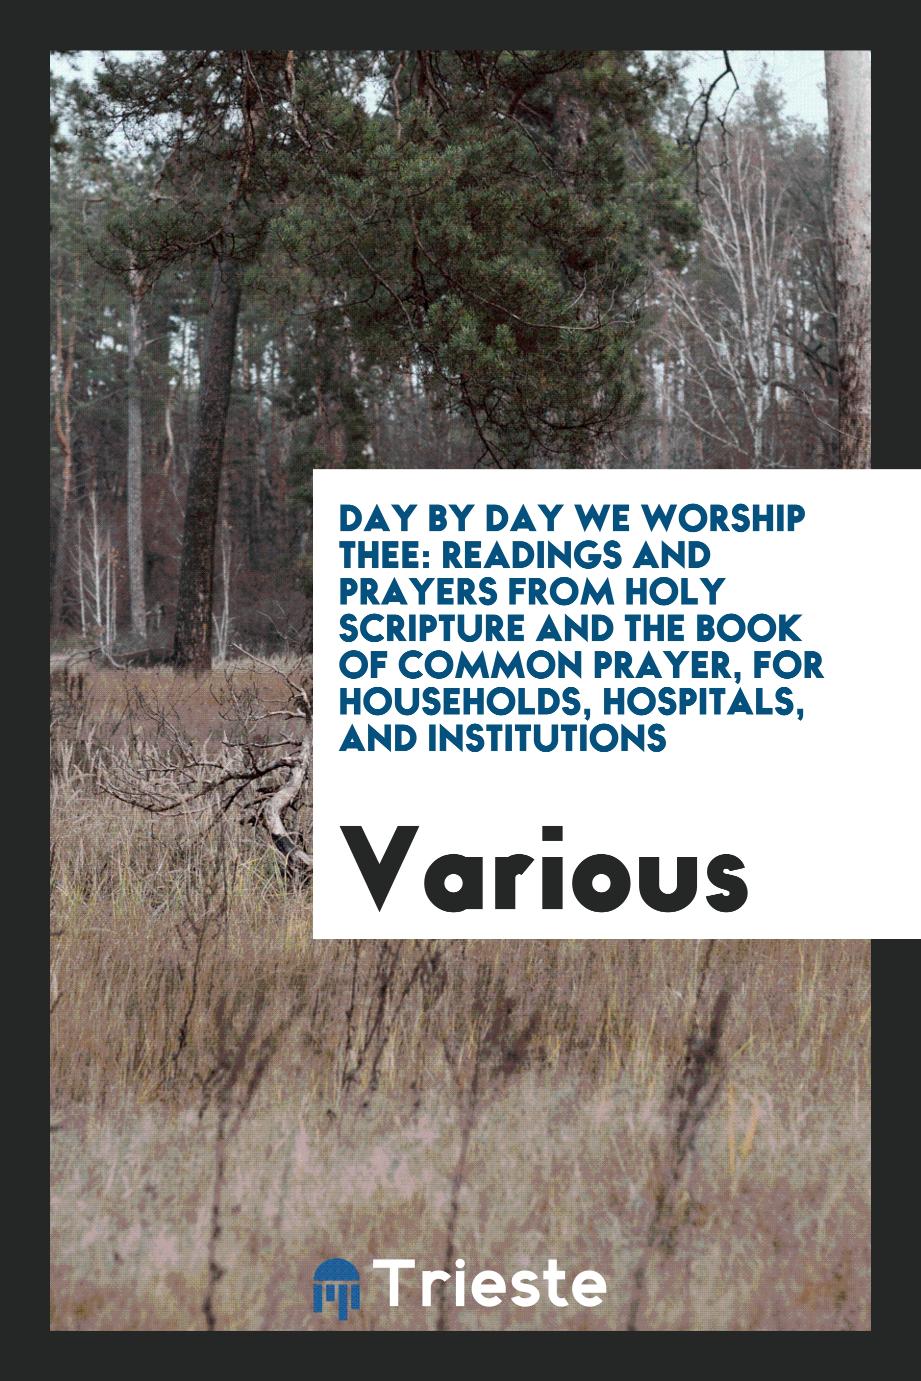 Day by day we worship thee: readings and prayers from Holy Scripture and the Book of Common Prayer, for households, hospitals, and institutions